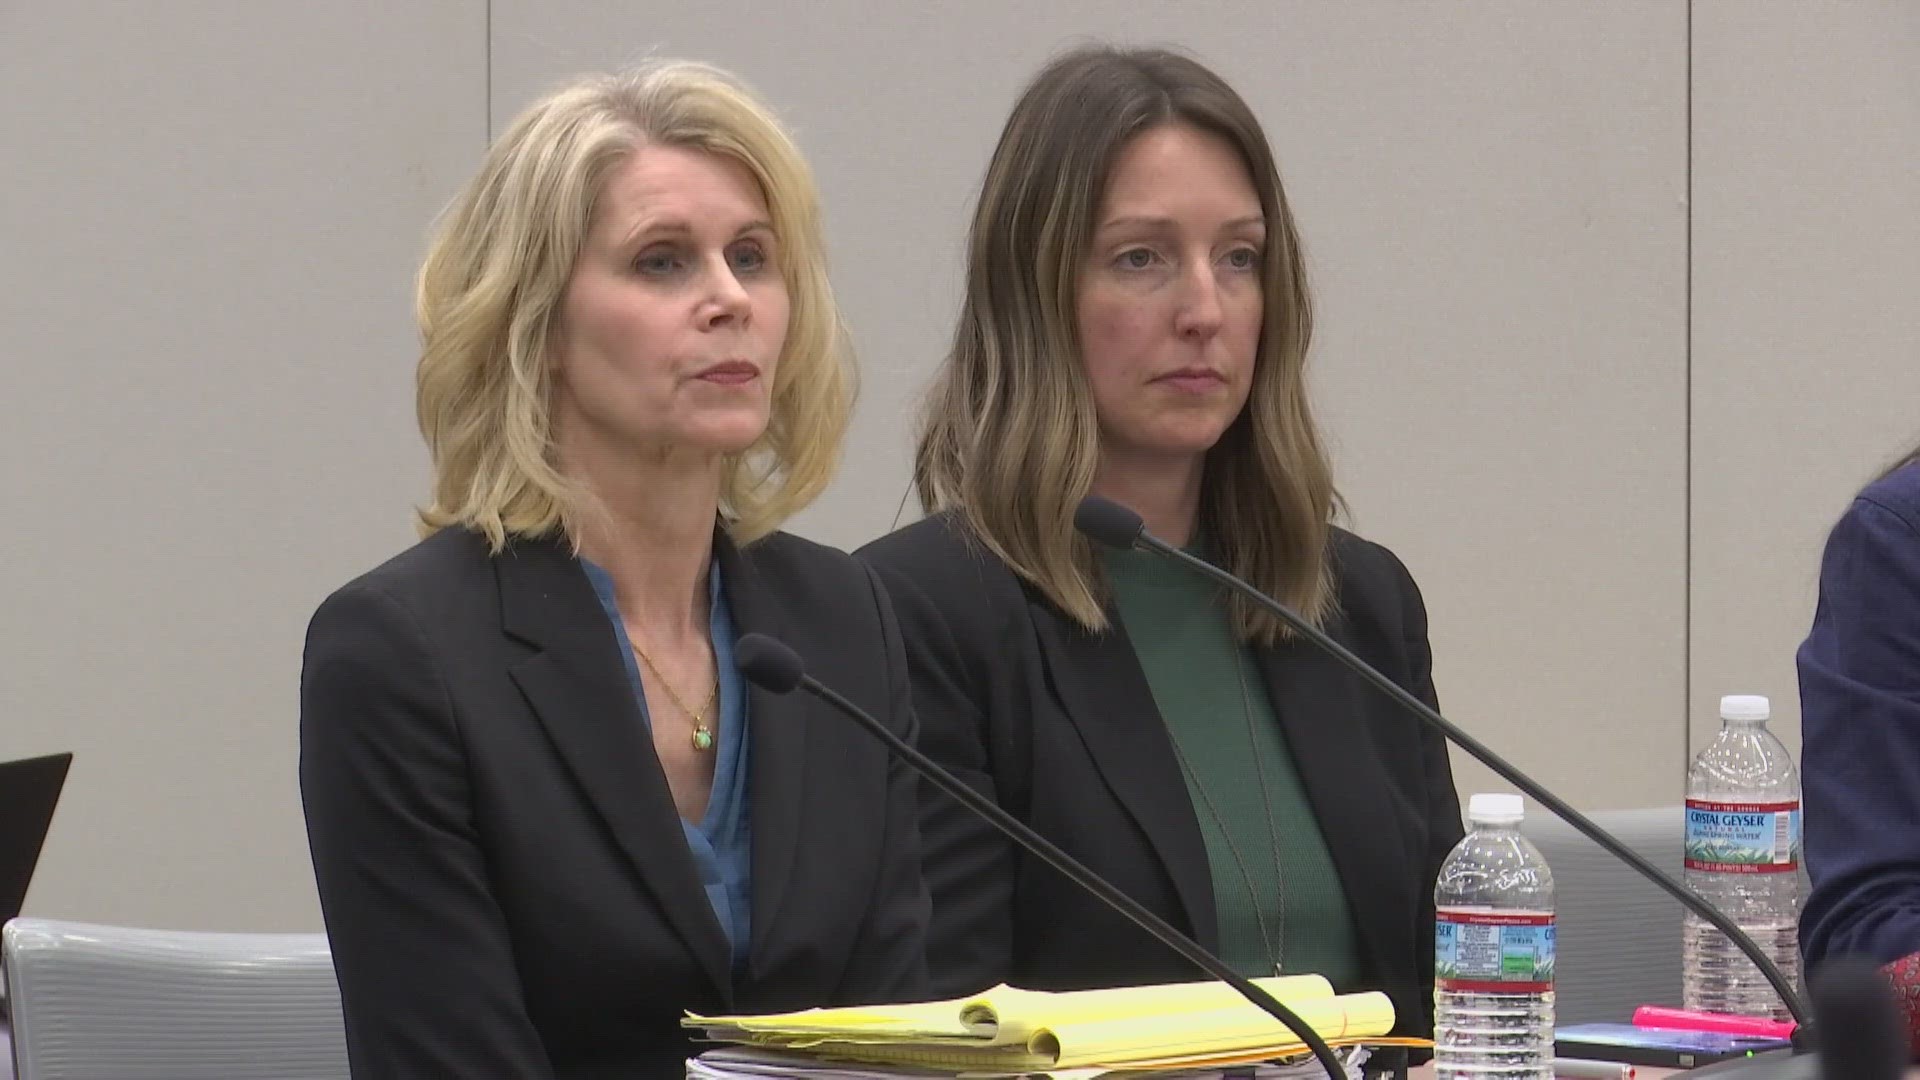 The hearing comes after Indiana's attorney general accused Dr. Caitlin Bernard of violating state law by not reporting the girl’s child abuse to Indiana authorities.